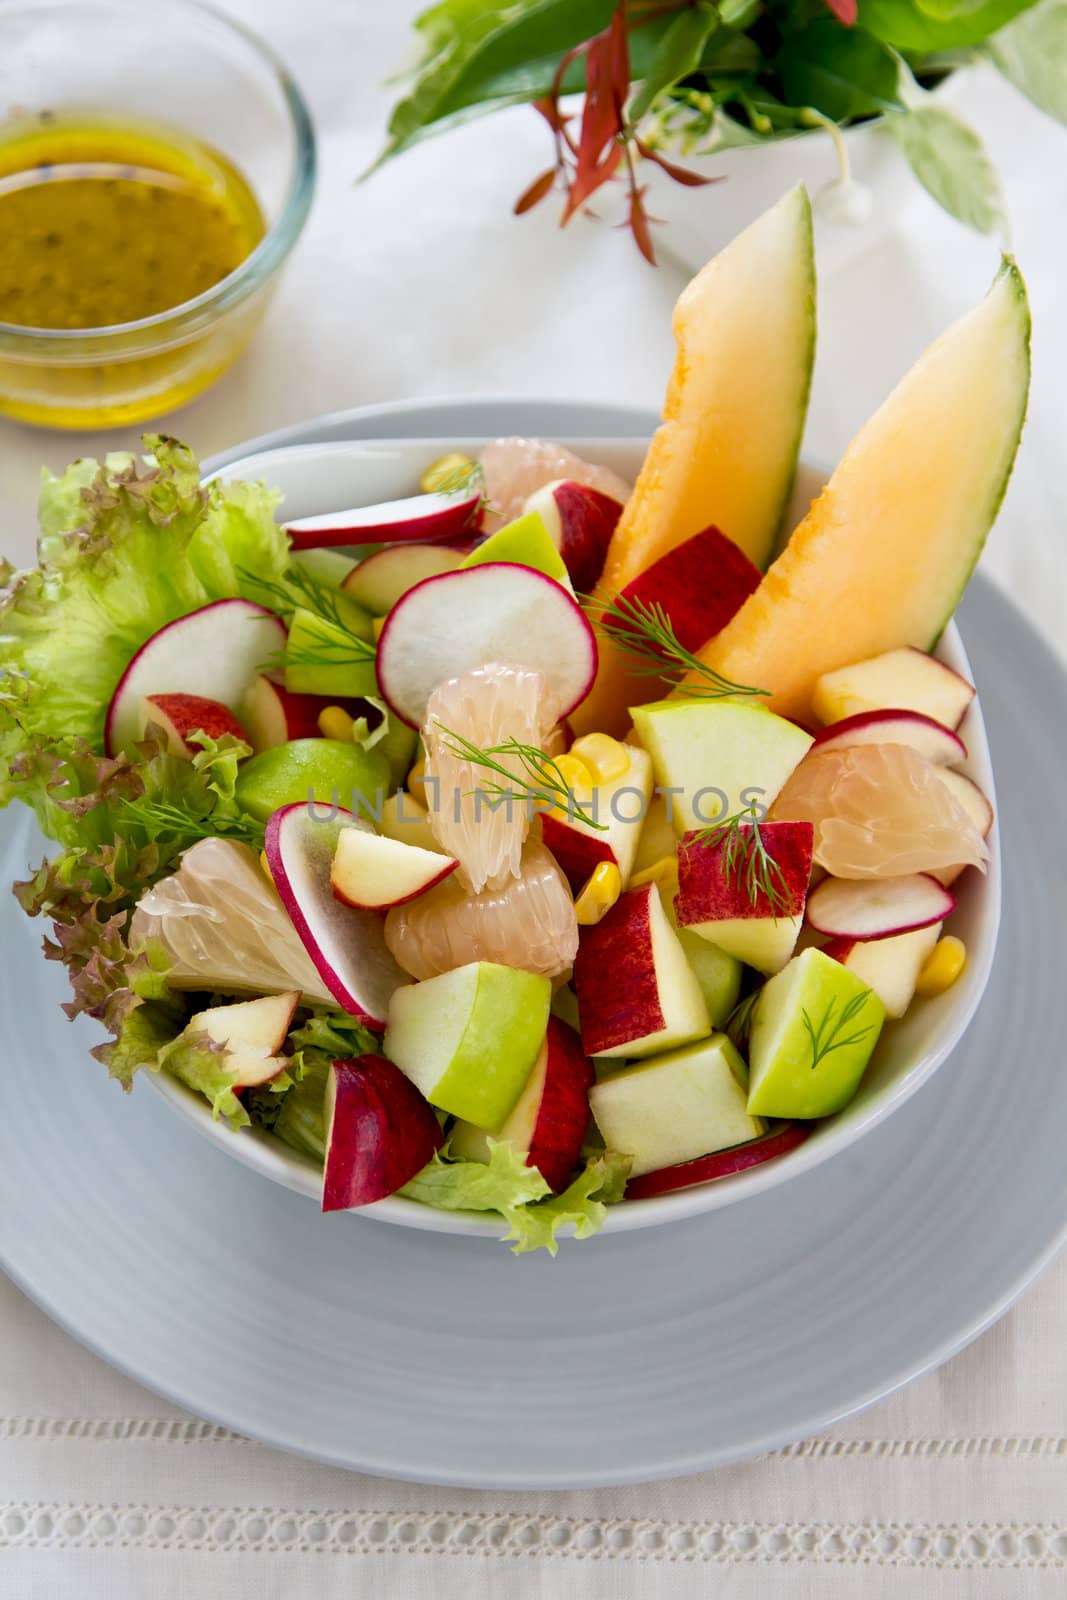 Apple,Melon and Grapefruit salad by vanillaechoes